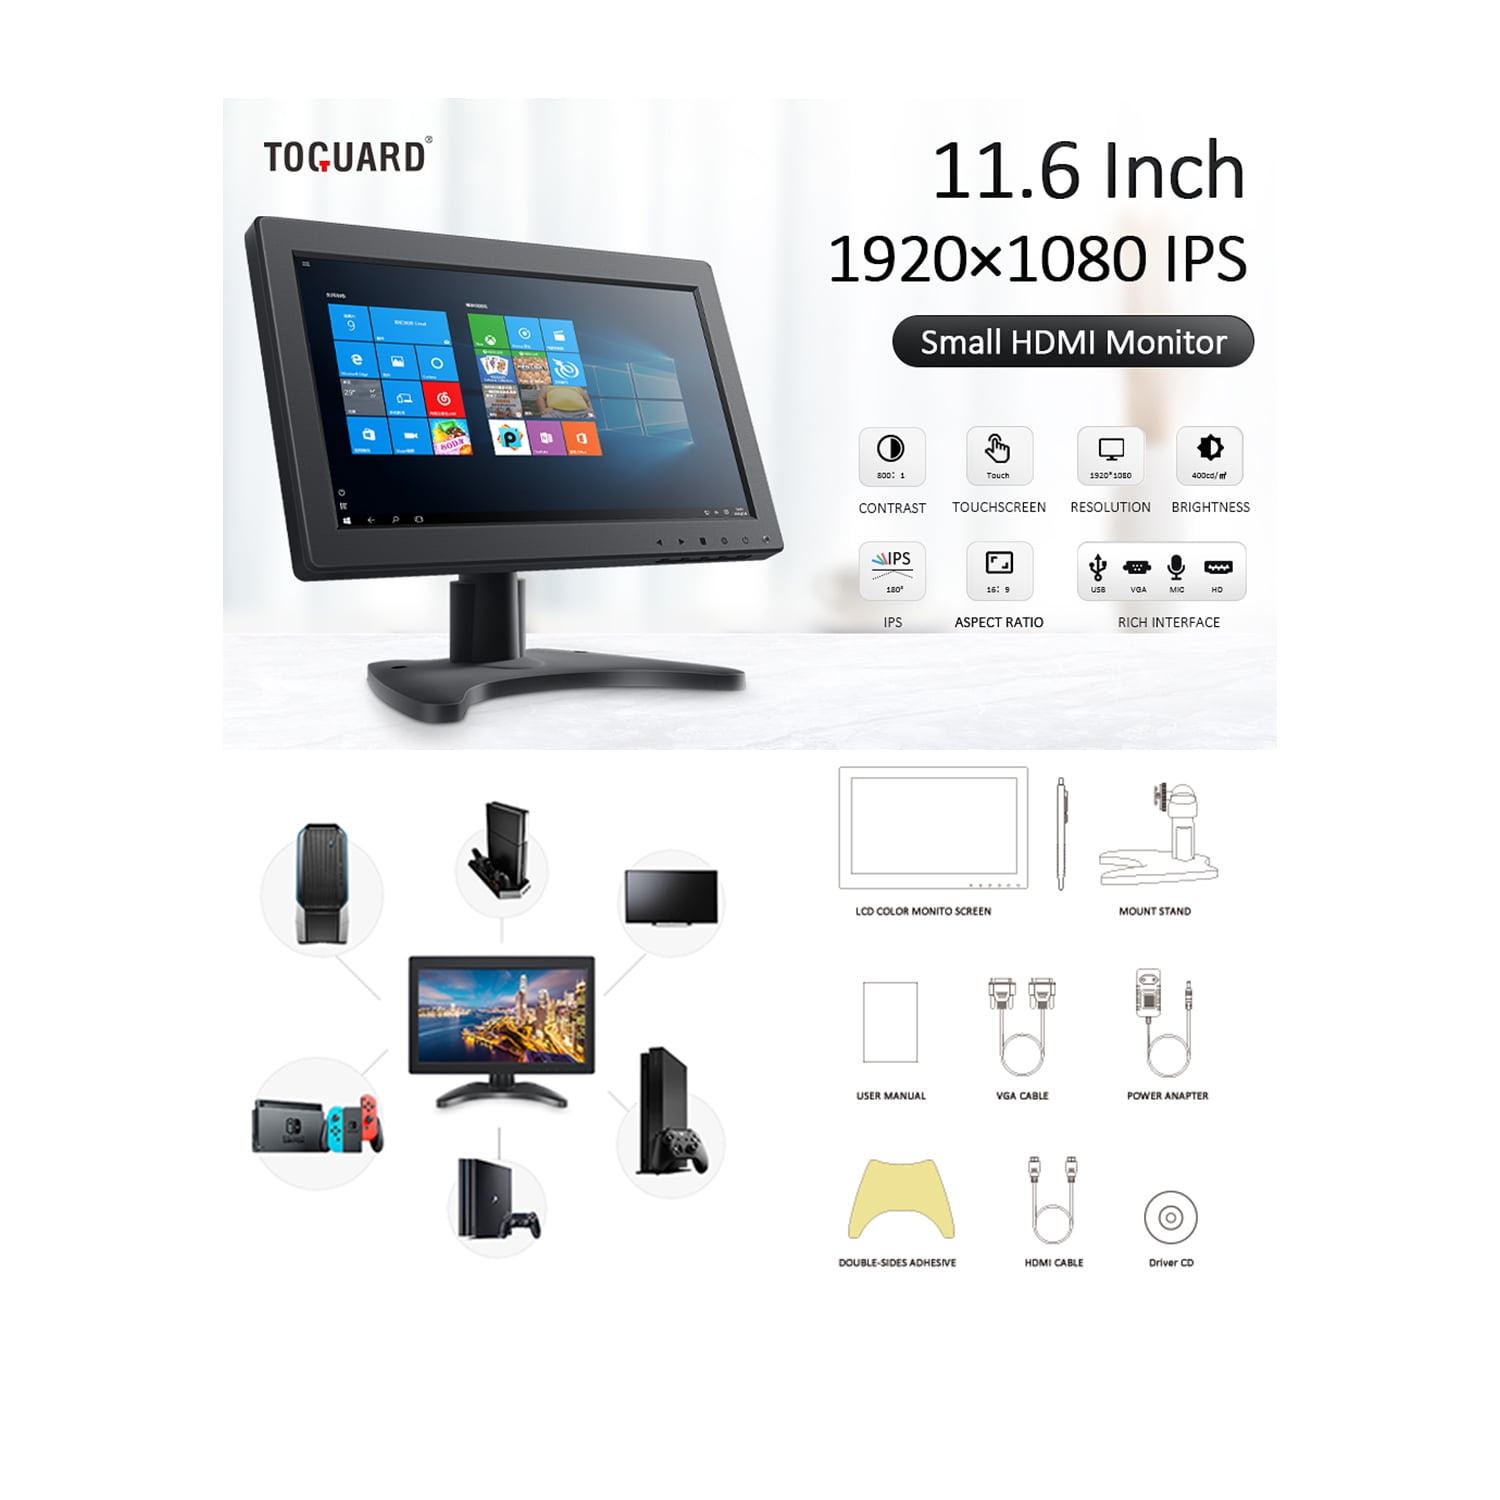 TOGUARD Small HDMI Monitor 12 Inch 1920x1080 IPS HD Touchscreen Monitor HDMI Computer Display Screen with HDMI/VGA/USB Output for Gaming CCTV Camera Raspberry Pi 